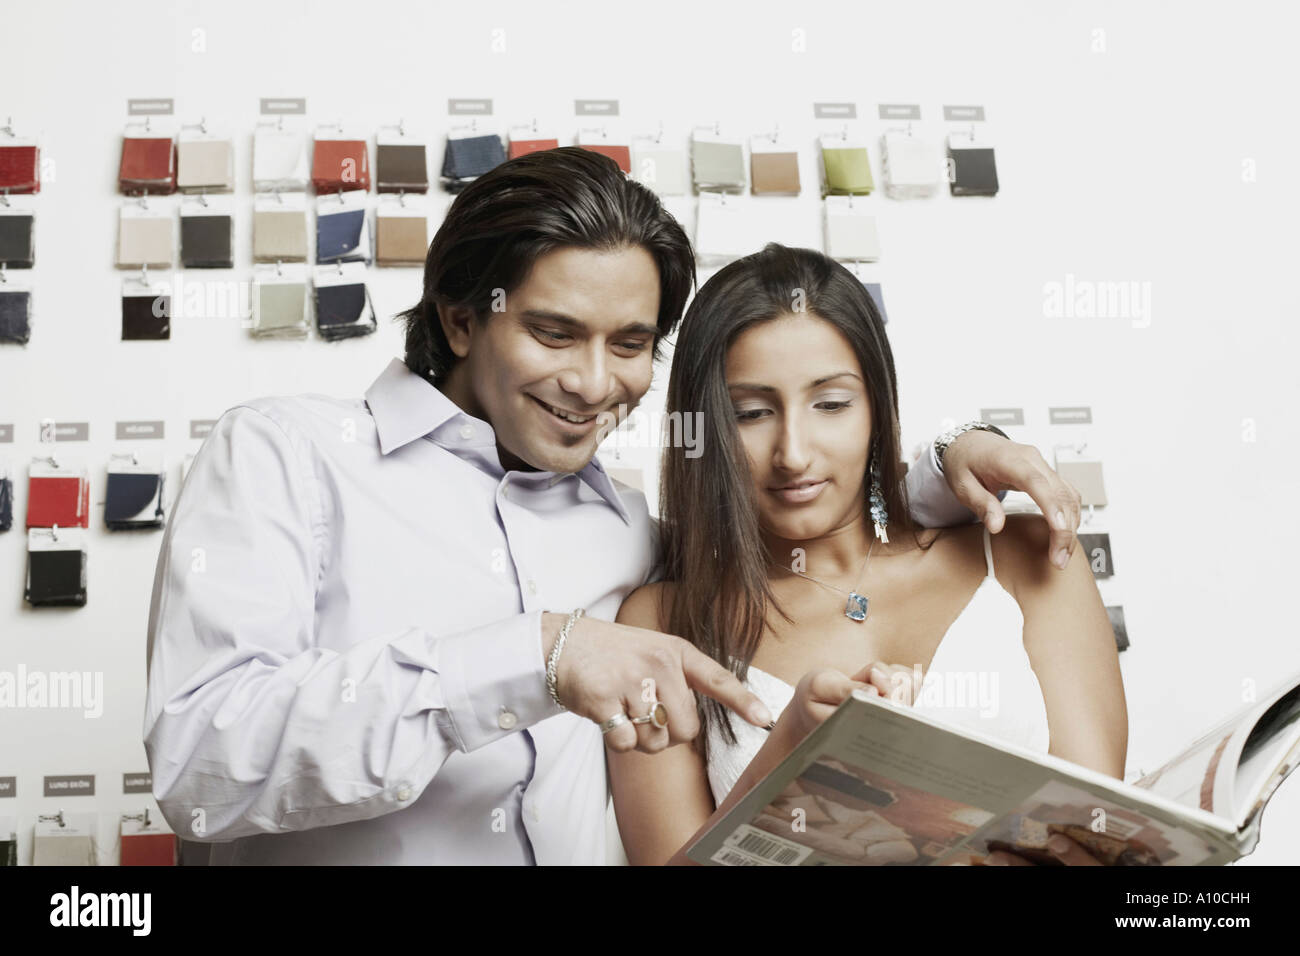 Close-up of a young couple choosing fabric swatches from a magazine Stock Photo